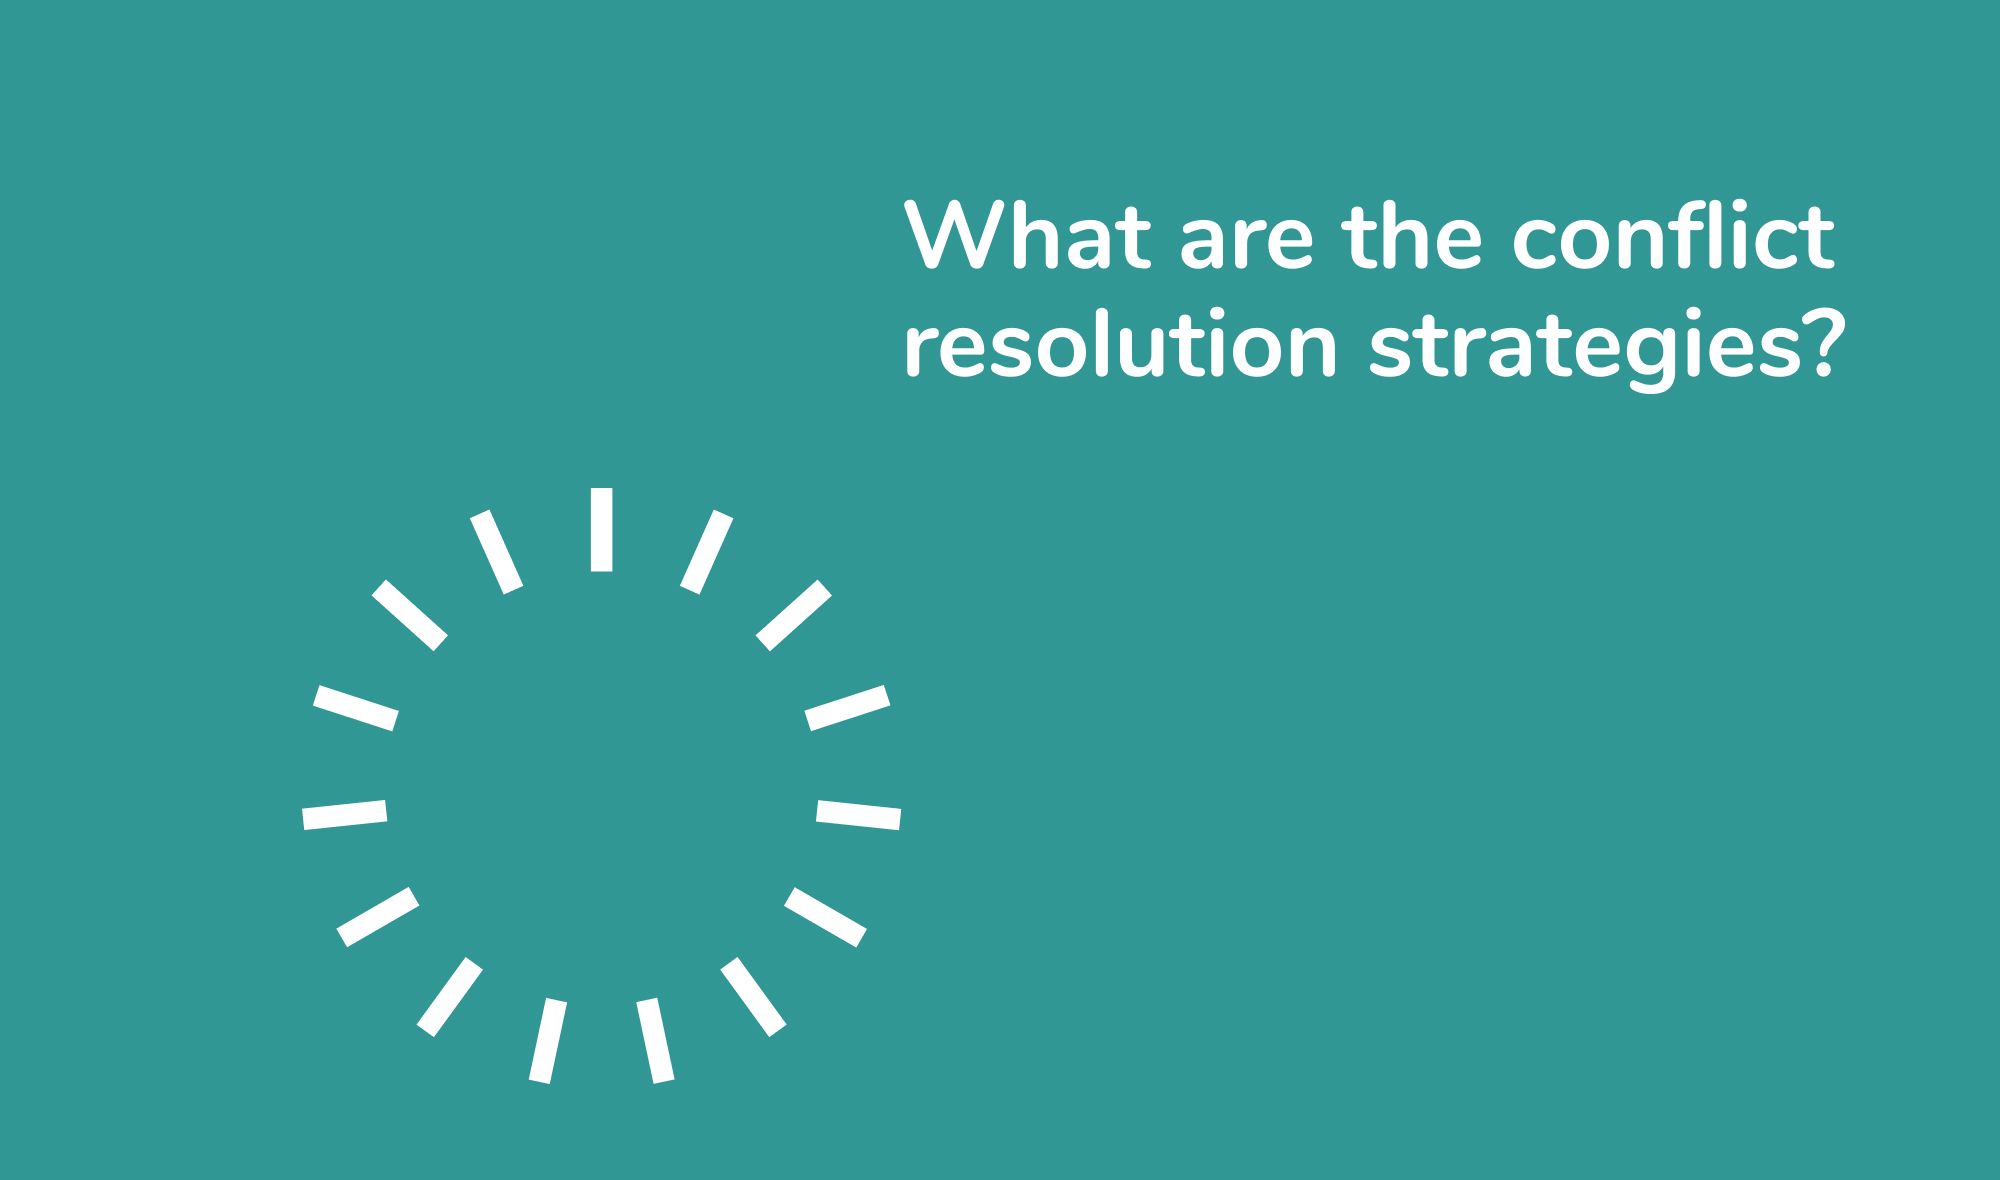 What are the conflict resolution strategies?